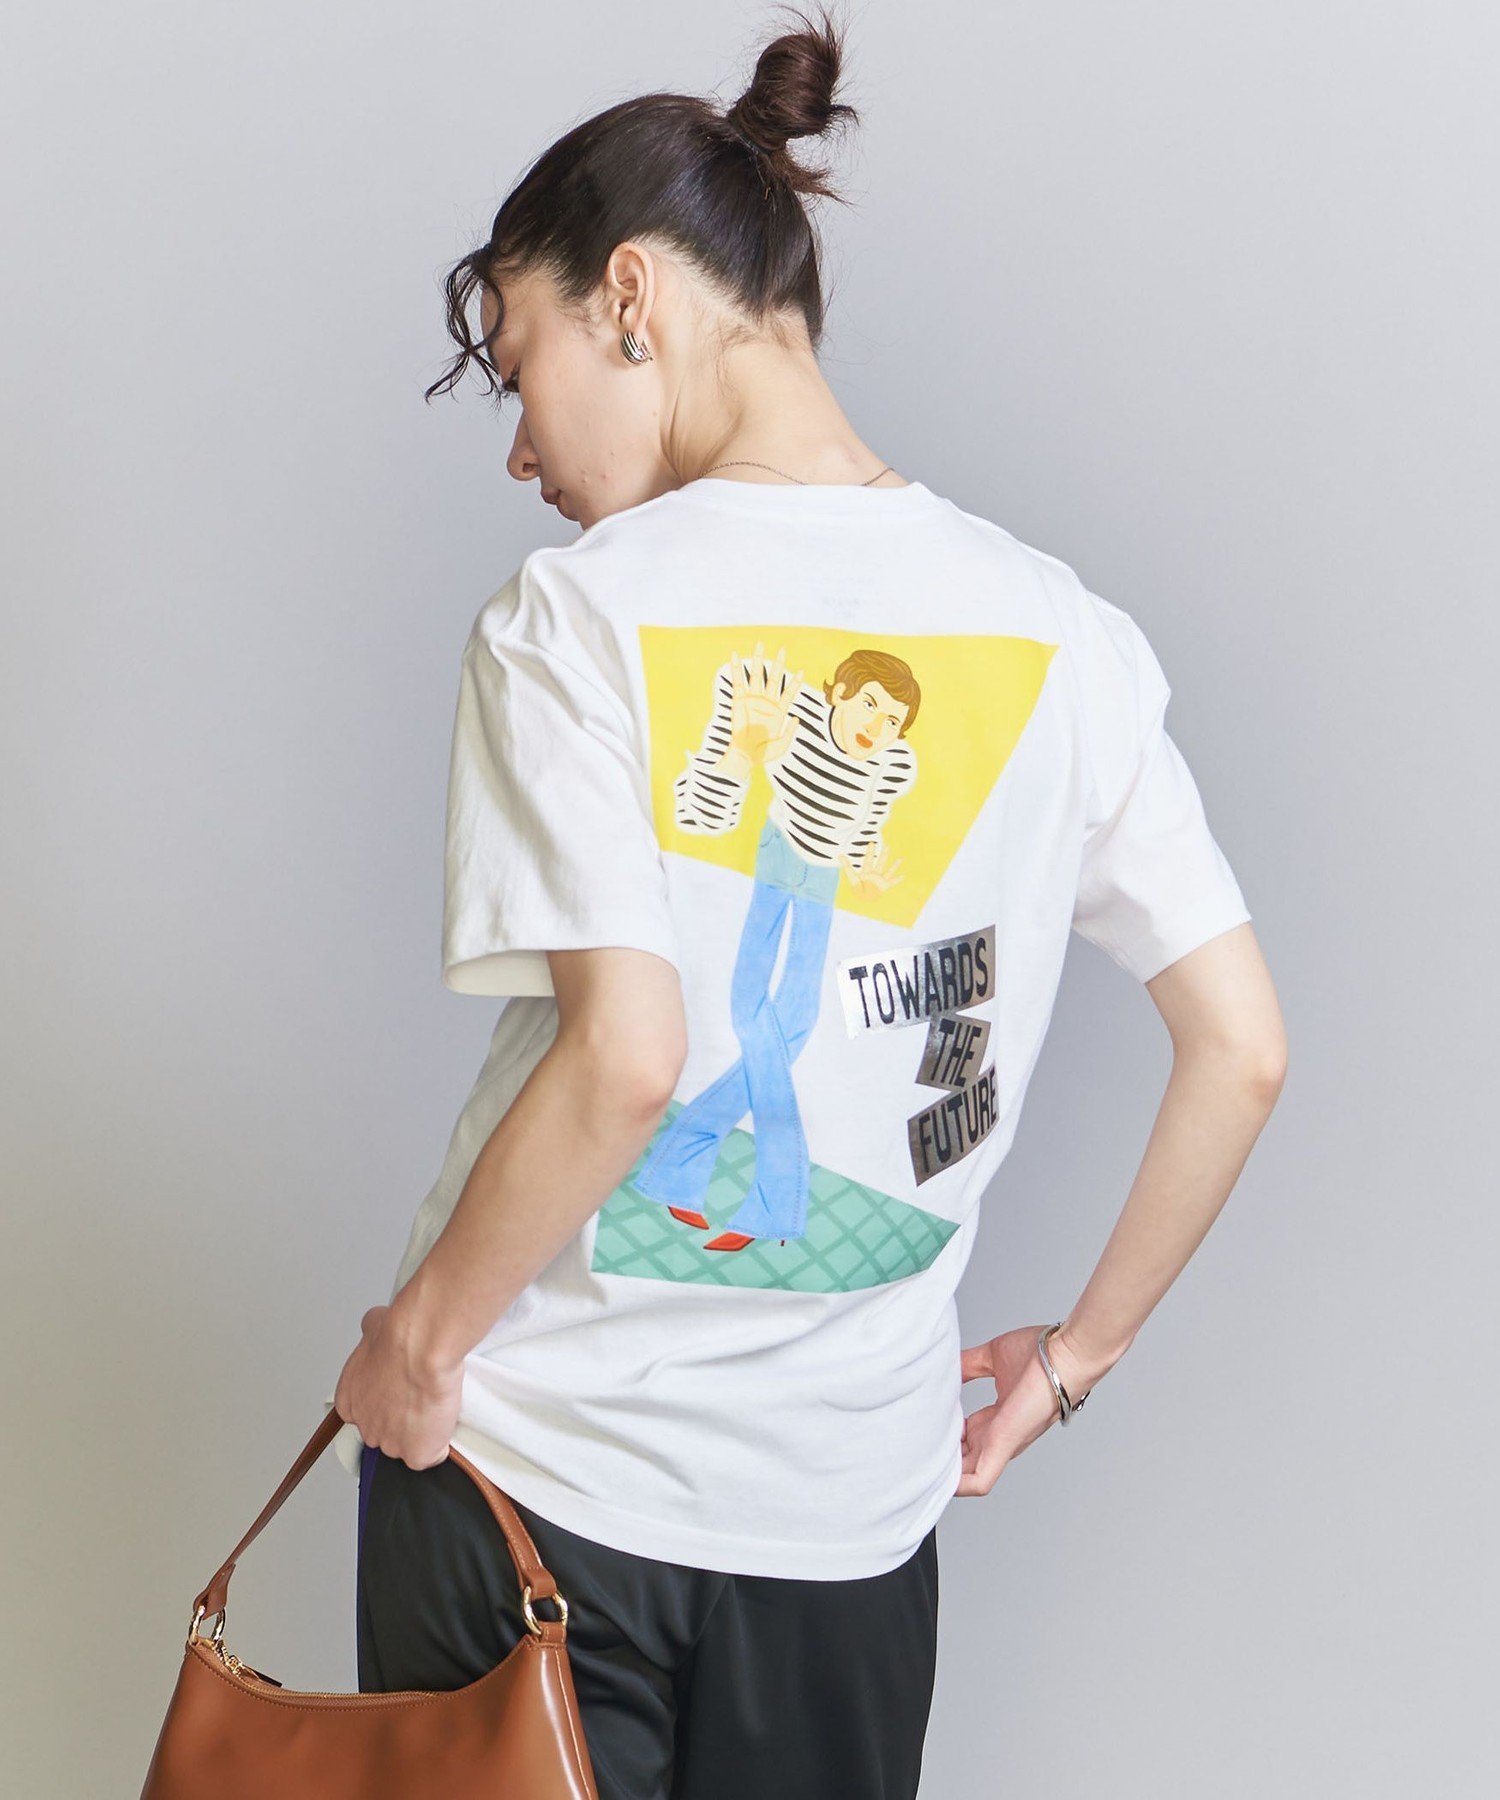 【SALE／40%OFF】BEAUTY&YOUTH UNITED ARROWS 【別注】＜AZUSA IIDA＞アートプリントTシャツ ユナイテッドアローズ アウトレット トップス カットソー・Tシャツ【送料無料】